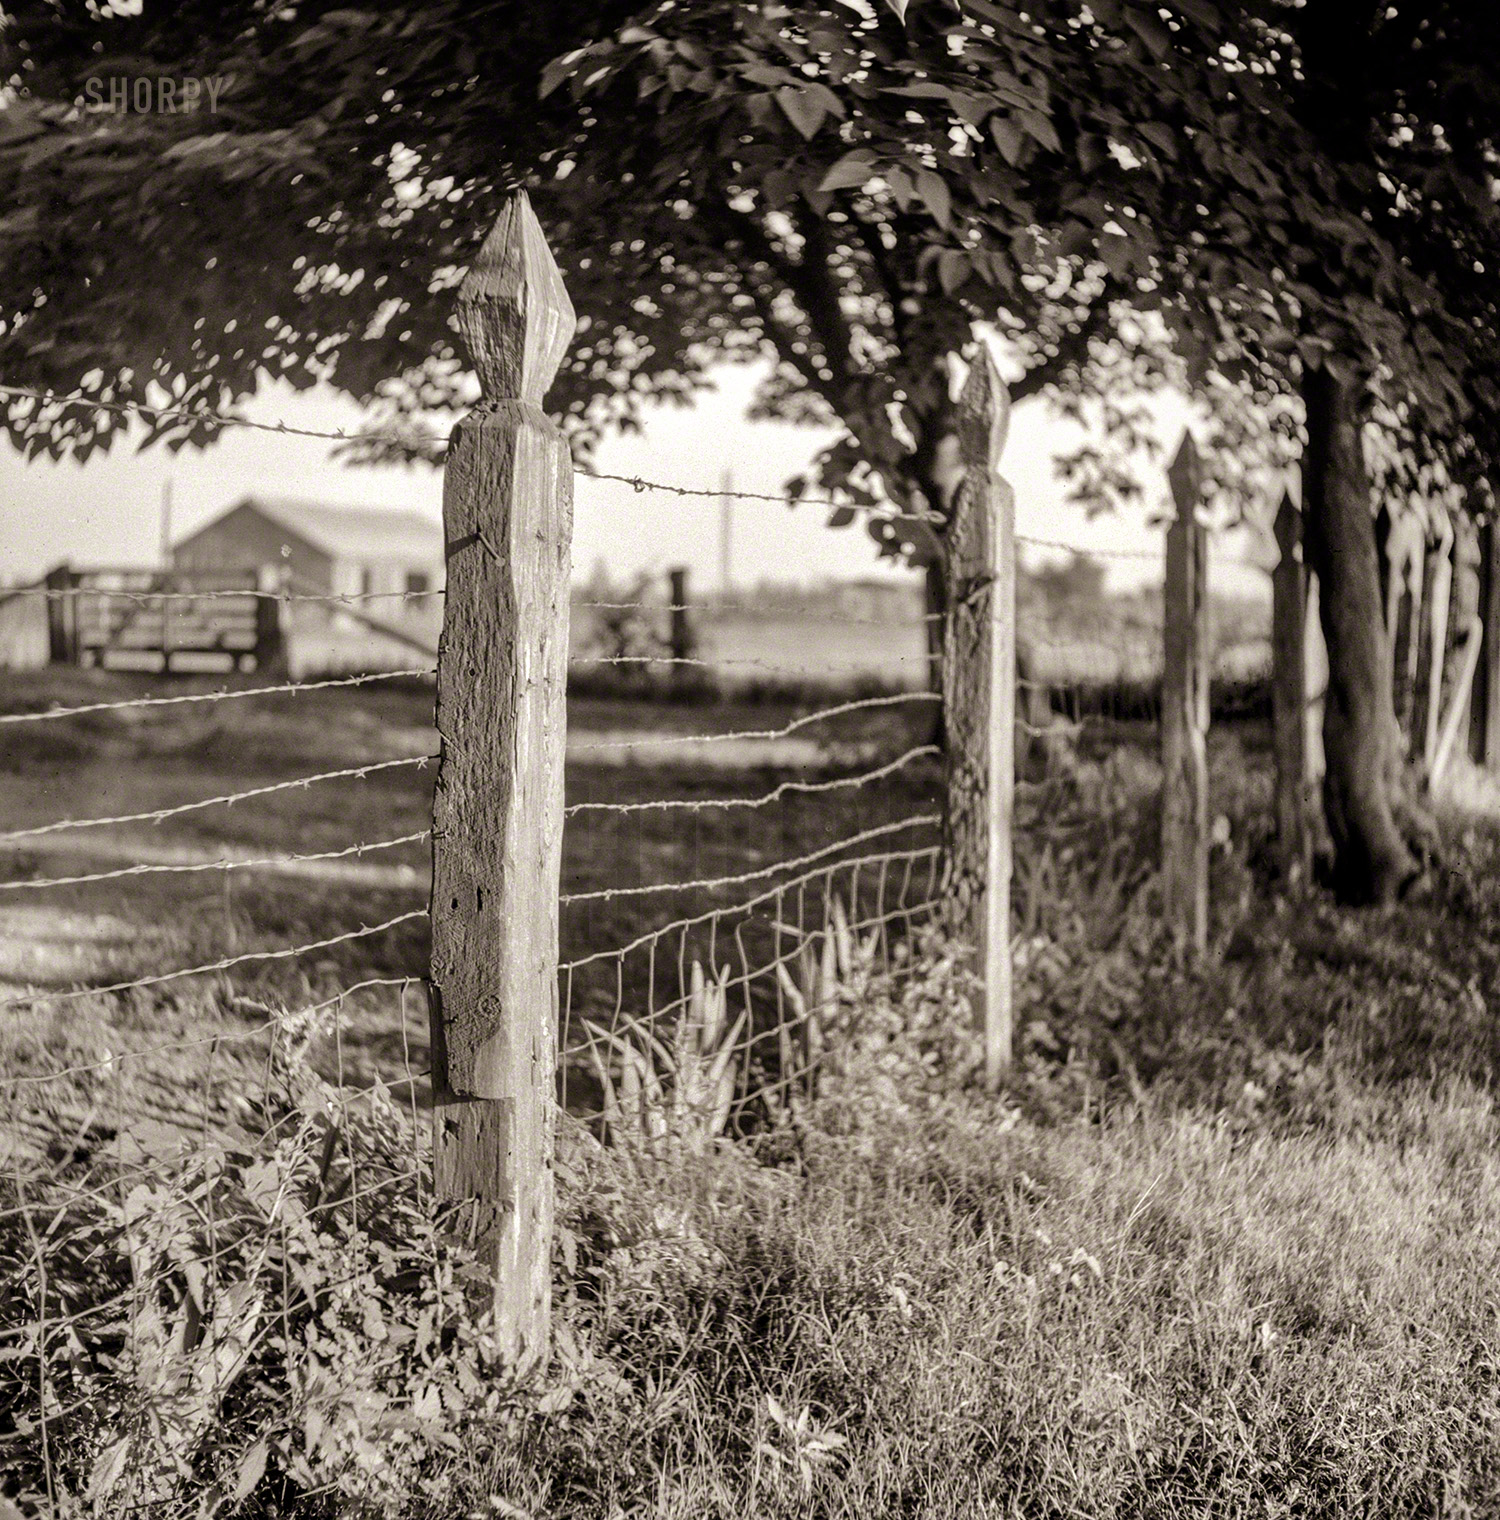 August 1940. "Fenceposts on King and Anderson Plantation, Clarksdale, Mississippi Delta, Mississippi." Medium format negative by Marion Post Wolcott for the Farm Security Administration. View full size.